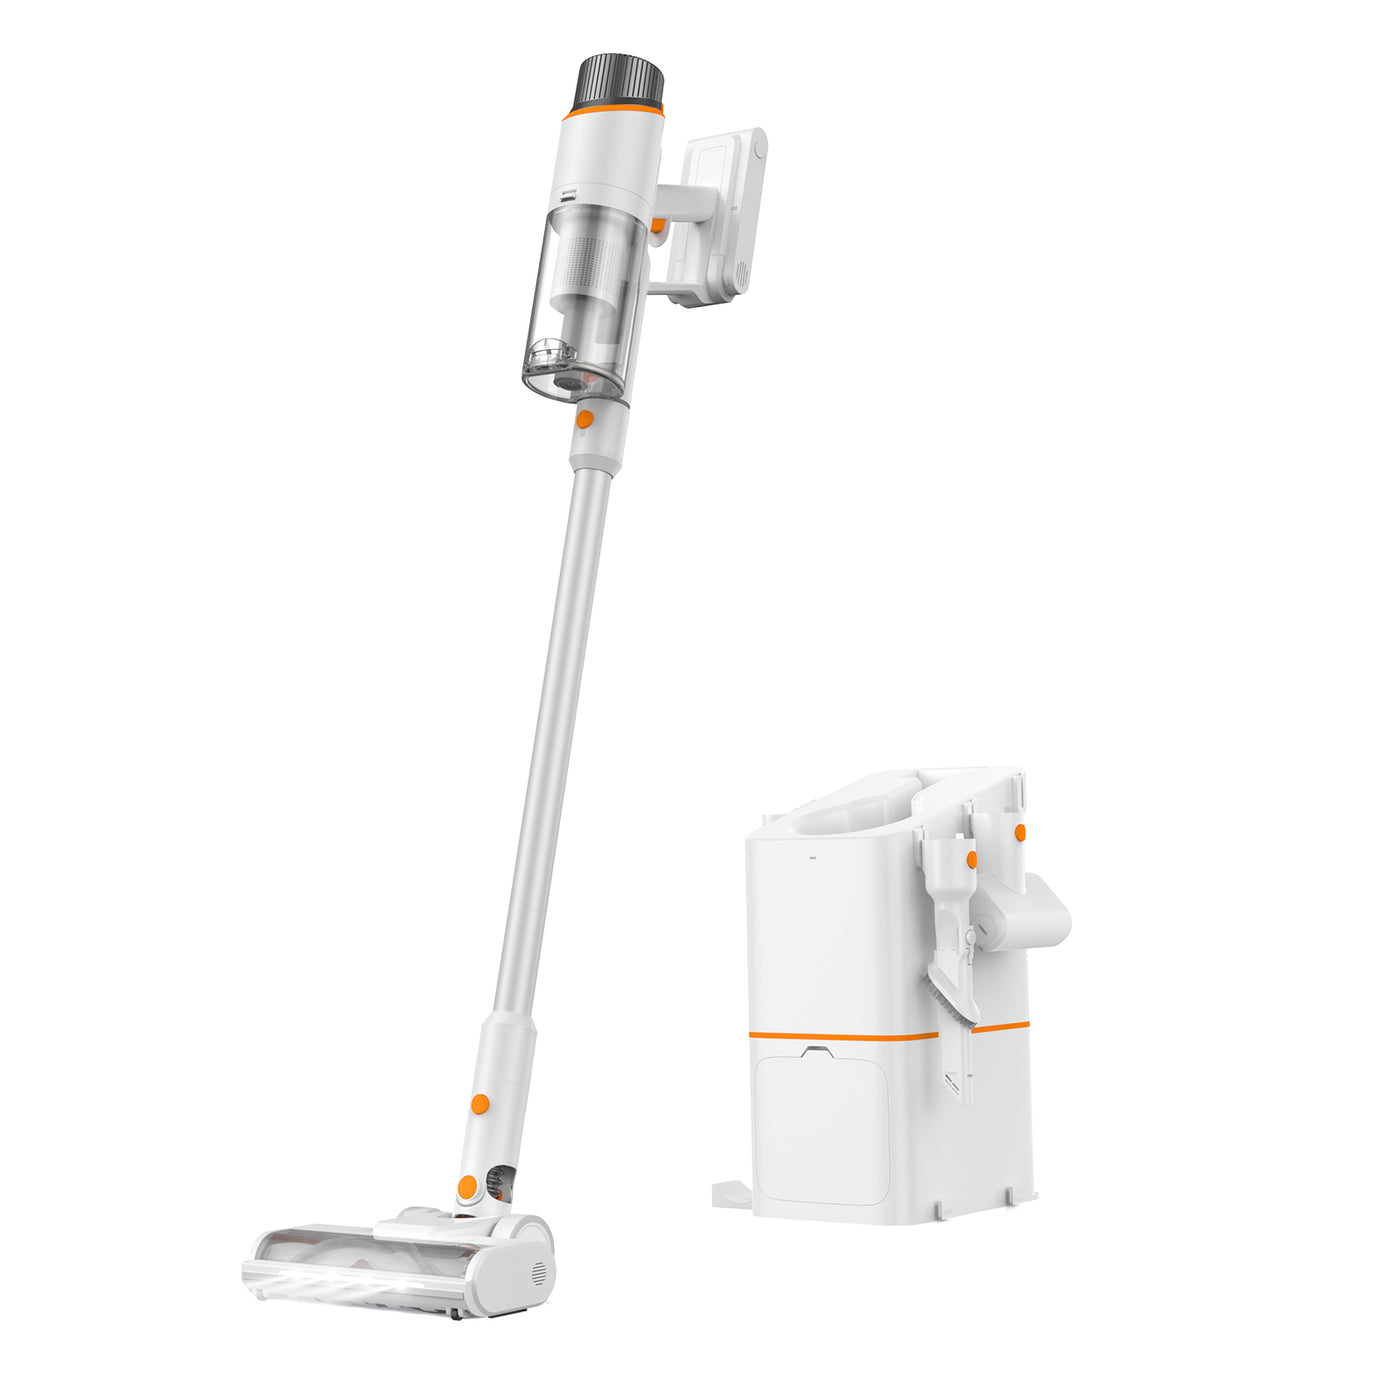 VC10 Pro Handstick Vacuum with 3 in 1 Auto Dust Collection Cleaning Station